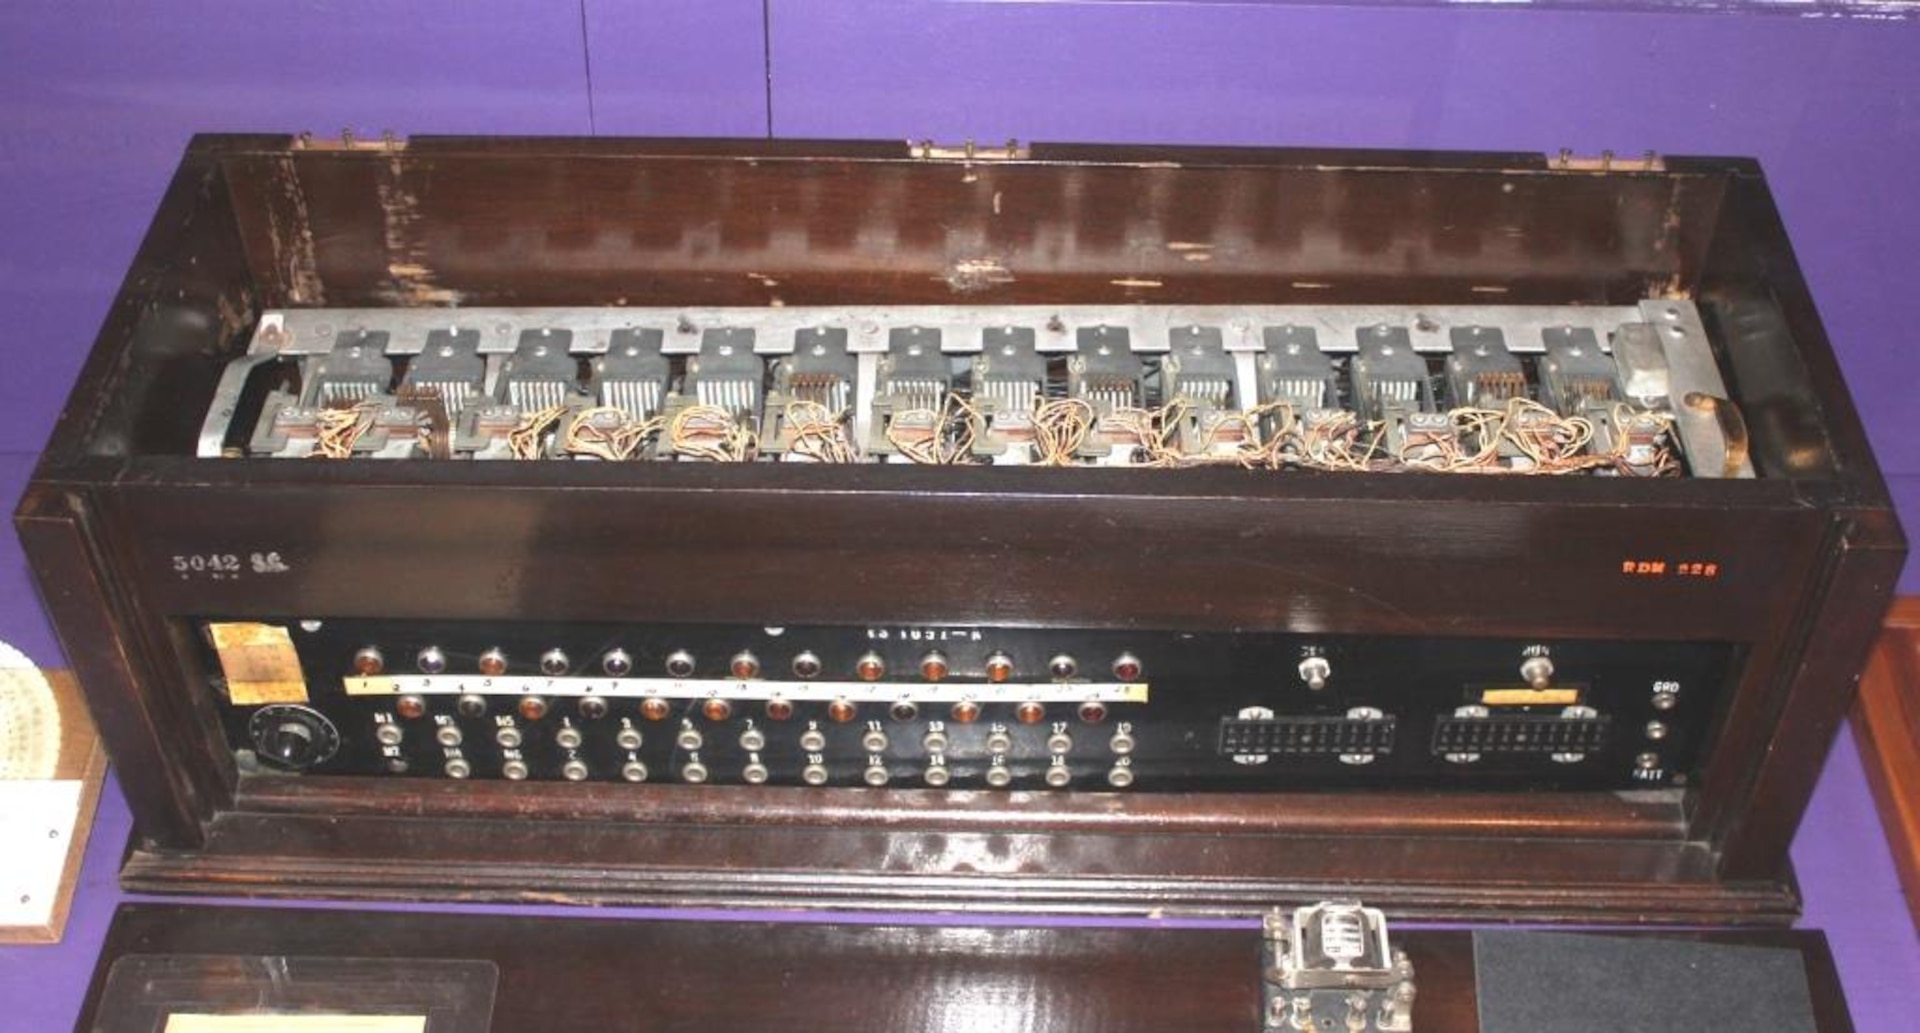 File:Typex cipher machine at the National Cryptologic Museum.agr.jpg -  Wikimedia Commons